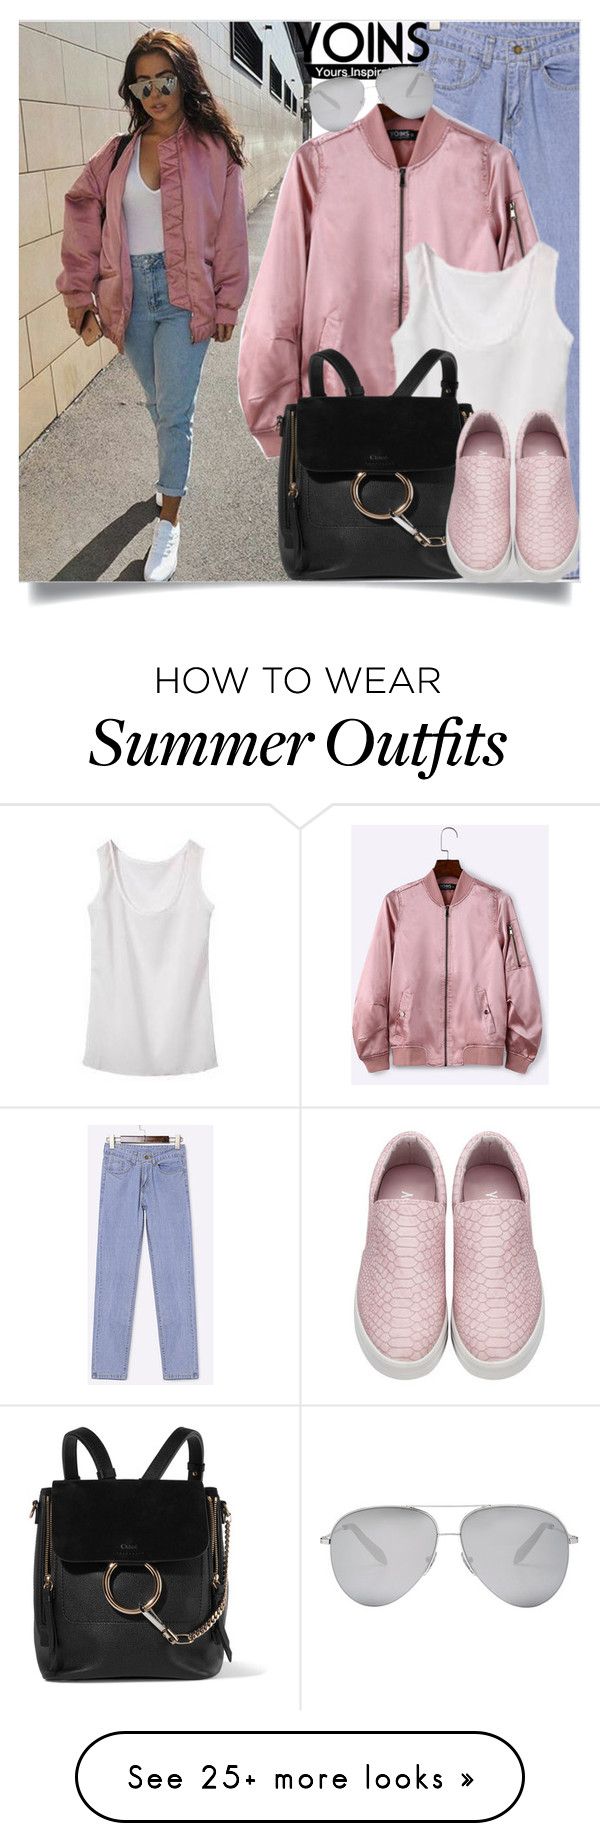 "Yoins: Satin Jacket" by yoinscollection on Polyvore featuring ChloÃ...